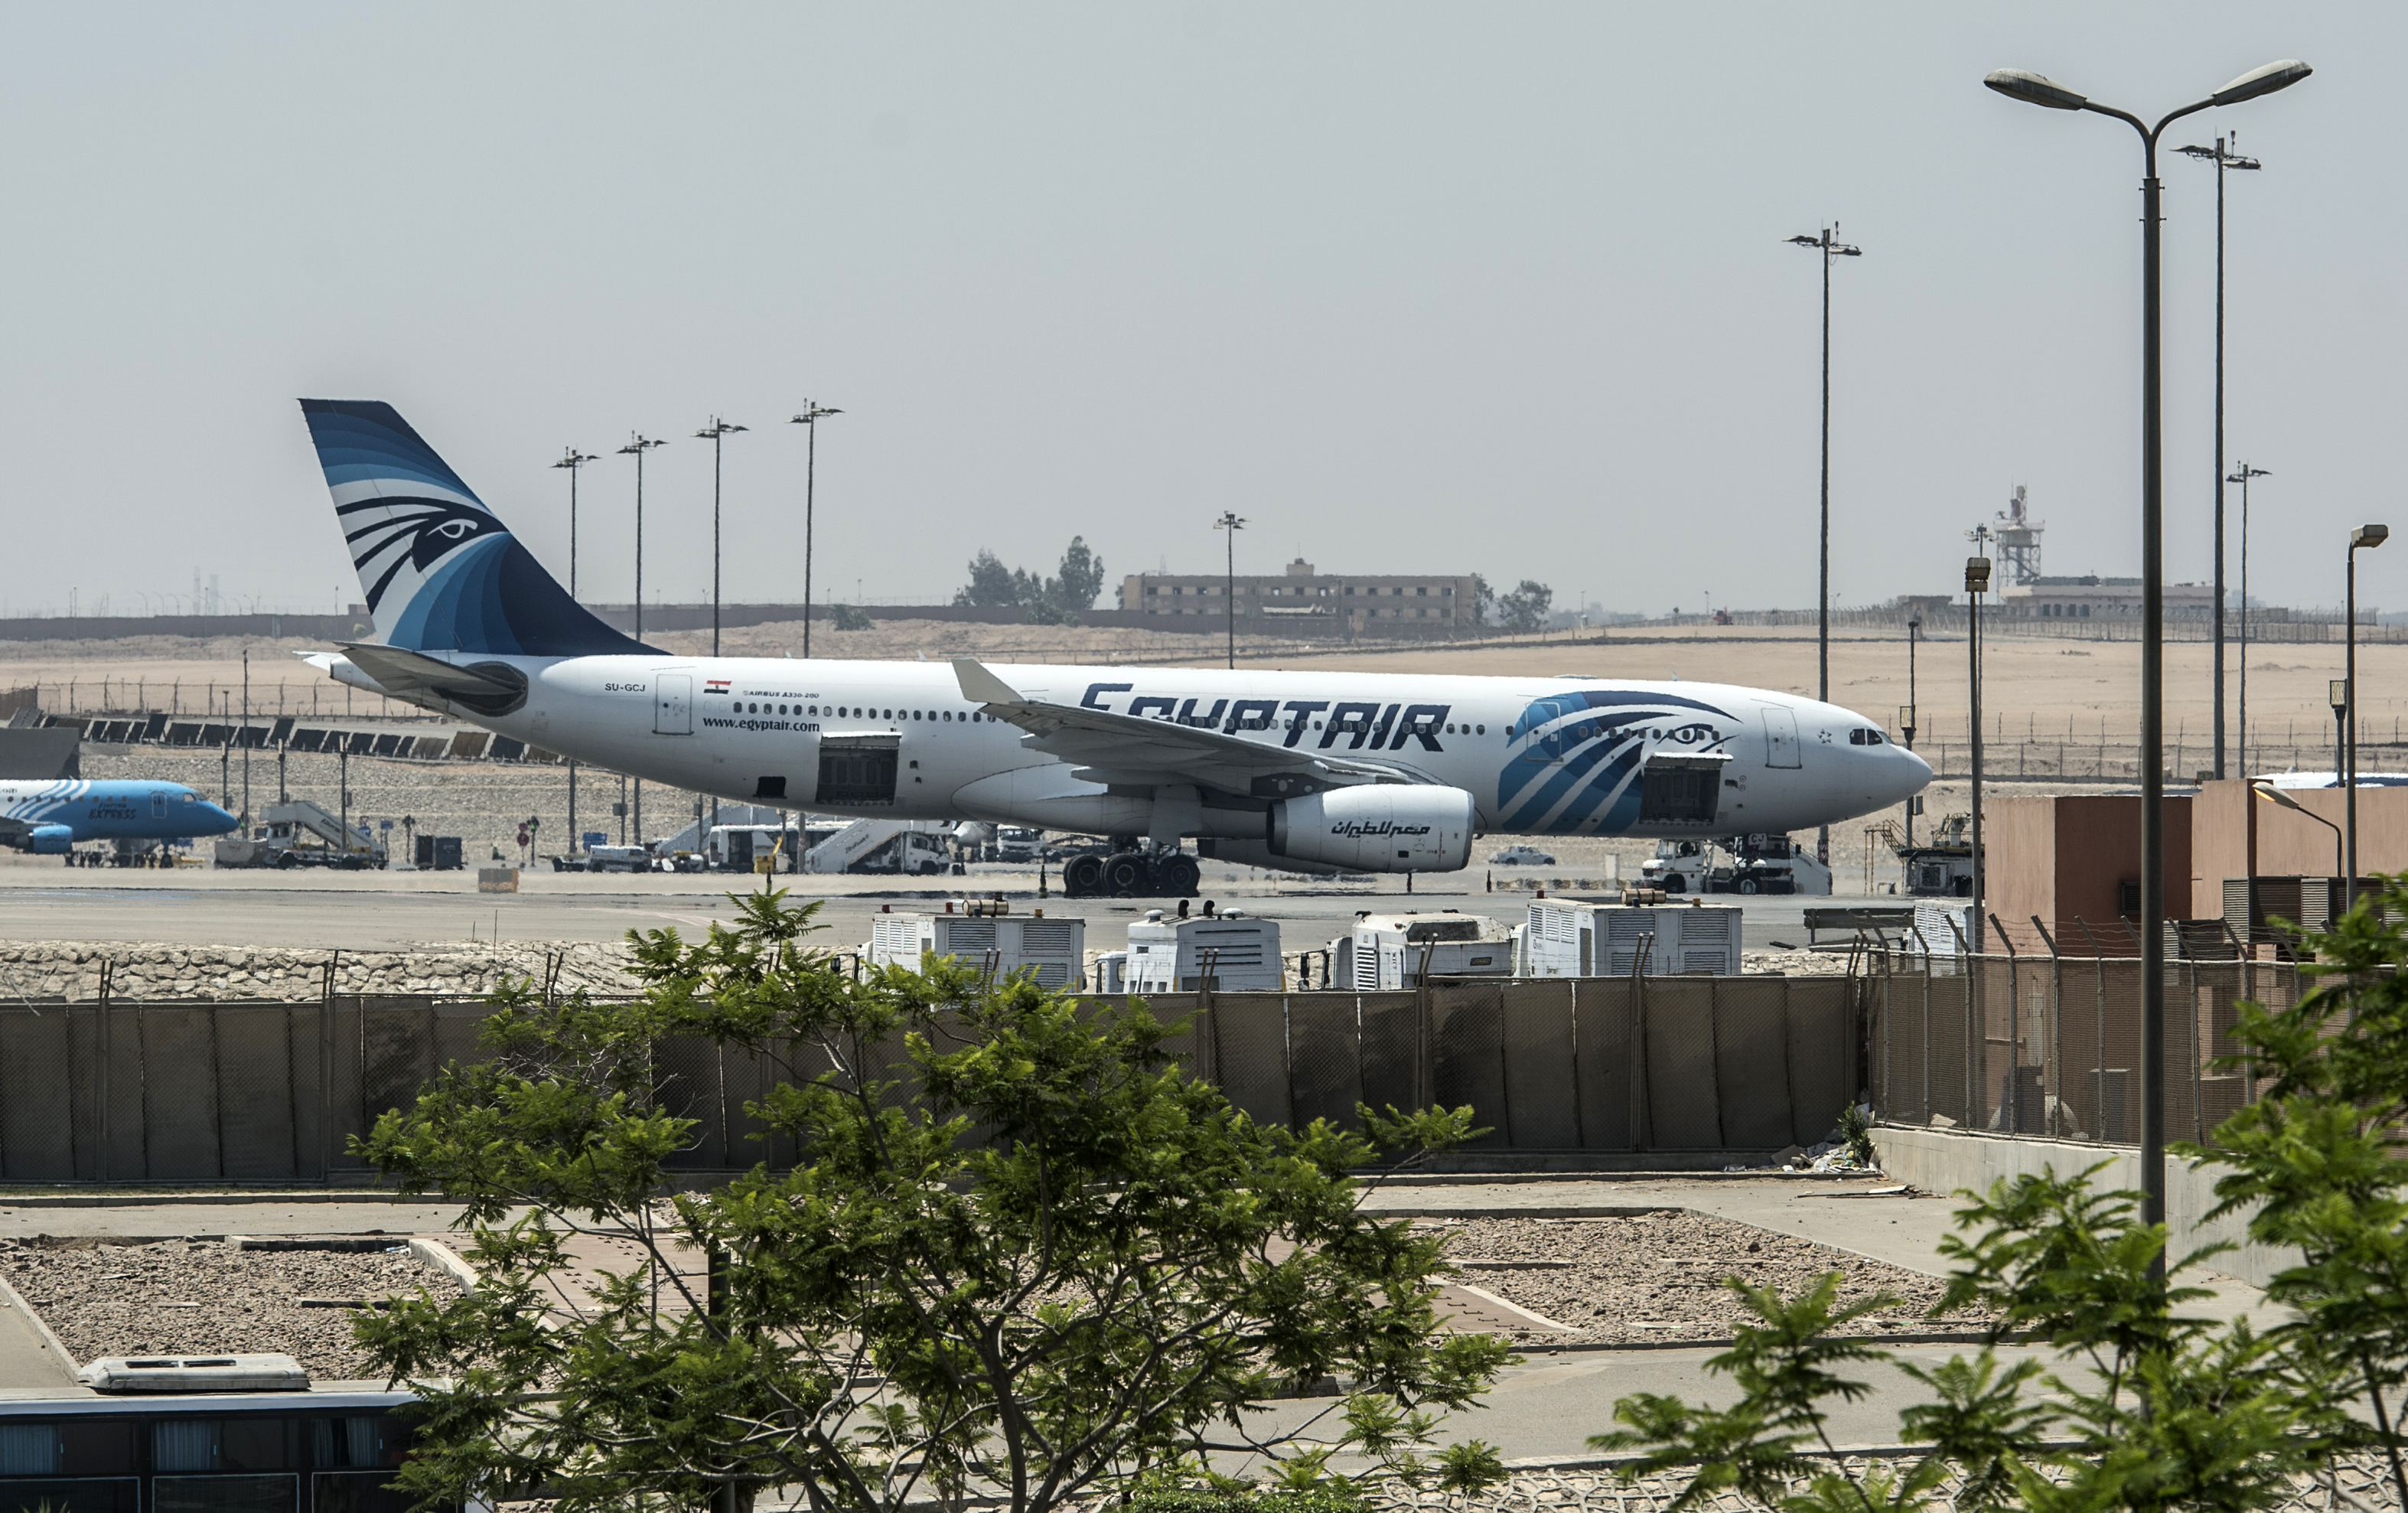 An EgyptAir plane is seen on the tarmac at Cairo international airport on May 19, 2016 after an EgyptAir flight from Paris to Cairo crashed into the Mediterranean on with 66 people on board, prompting an investigation into whether it was mechanical failure or a bomb. Egypt's aviation minister said he could not rule out that an attack or a technical failure brought down the plane.  / AFP PHOTO / KHALED DESOUKI